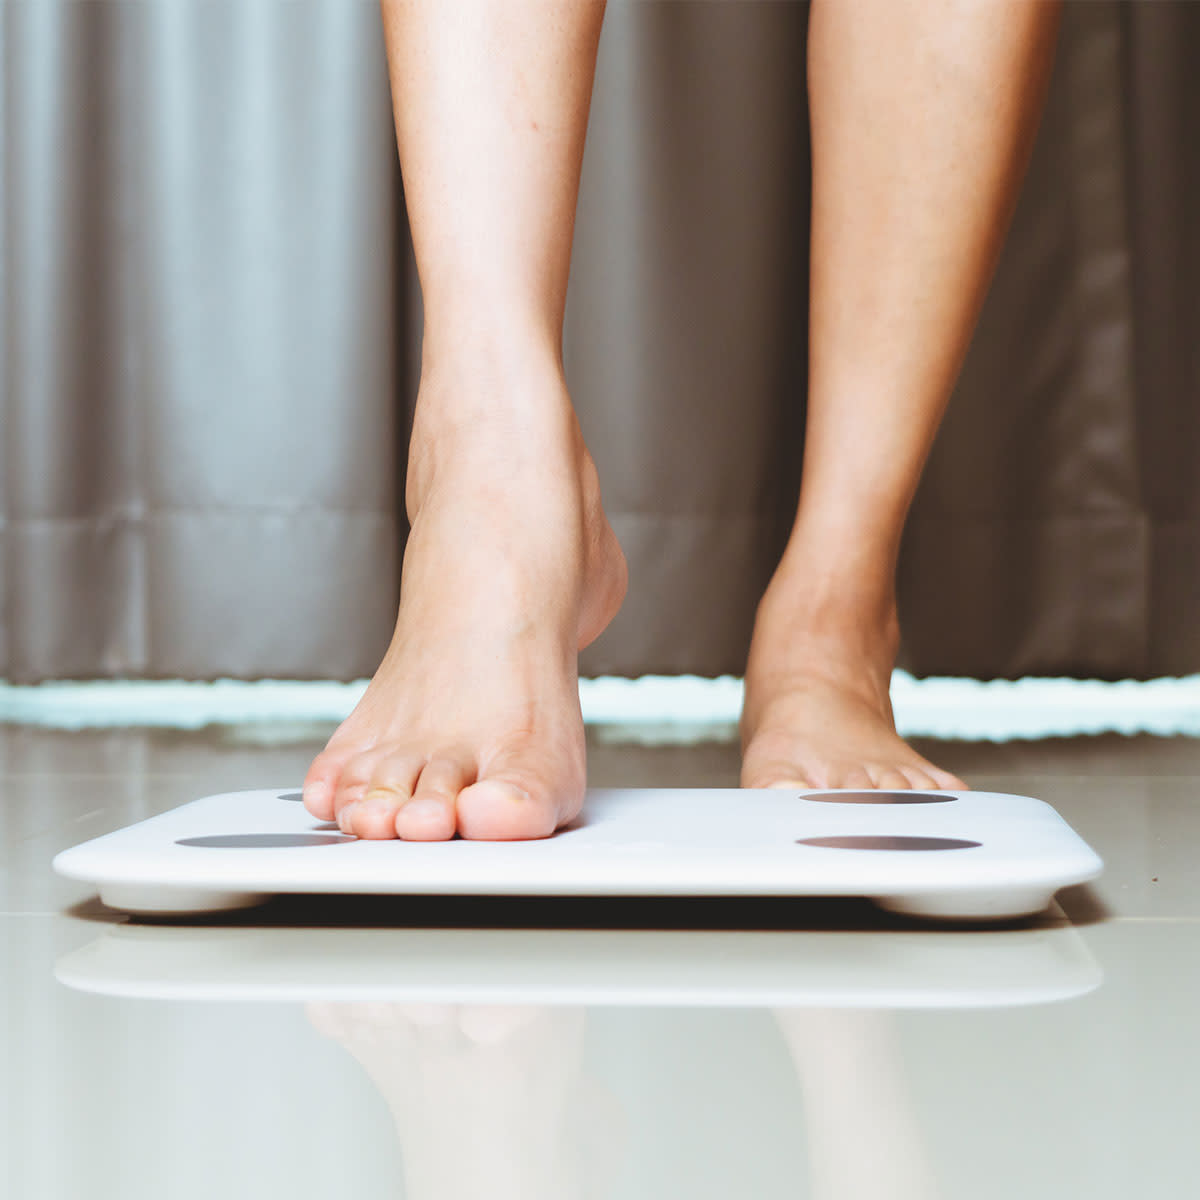 woman gently stepping onto a scale